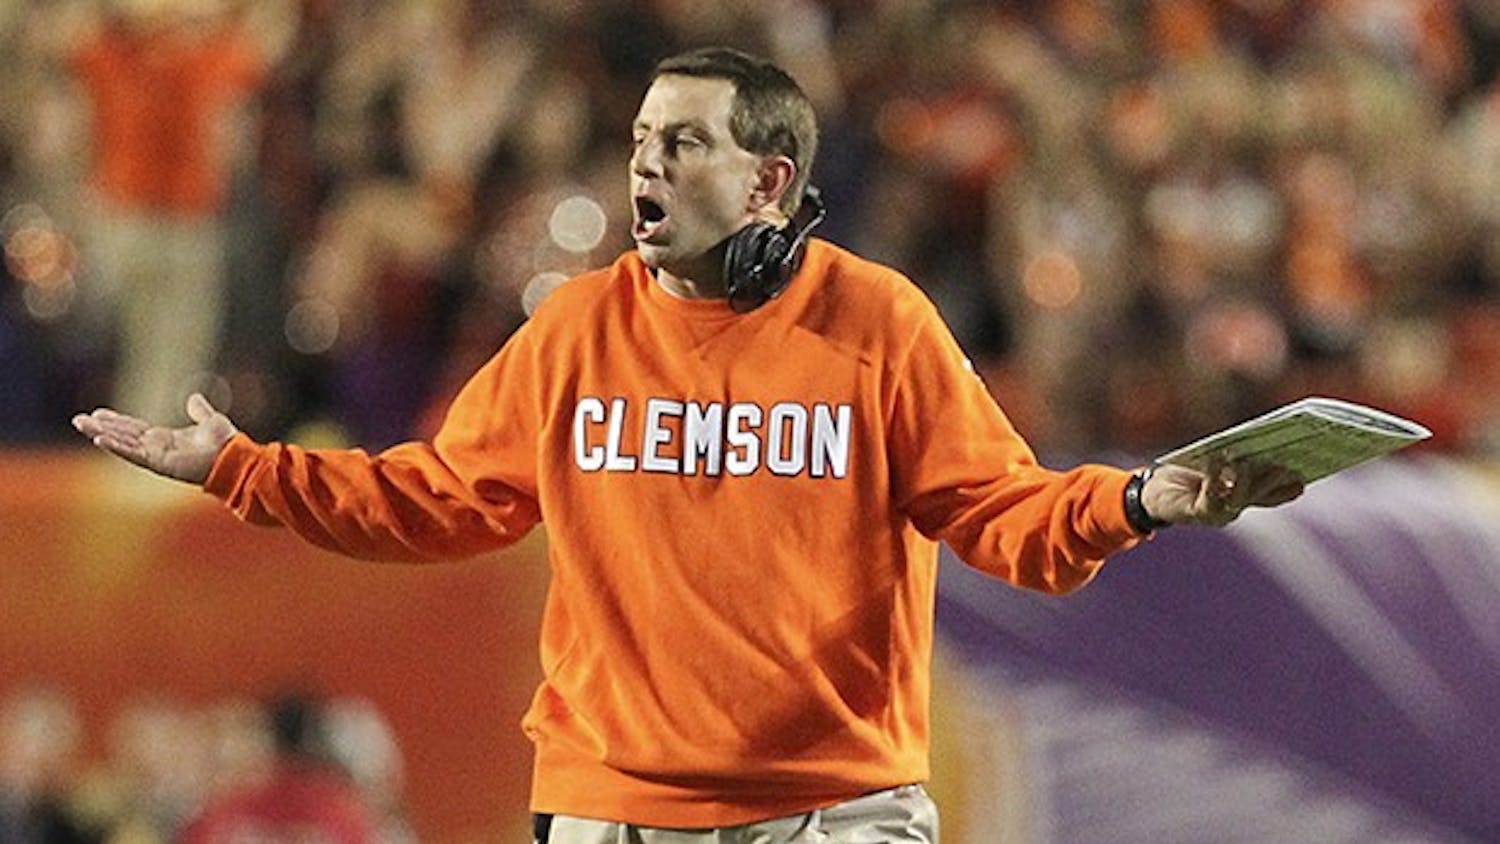 Clemson head coach Dabo Swinney gestures from the field in the first quarter against Ohio State in the Discover Orange Bowl at Sun Life Stadium in Miami Gardens, Fla., on Friday, Jan. 3, 2014. (Al Diaz/Miami Herald/MCT)